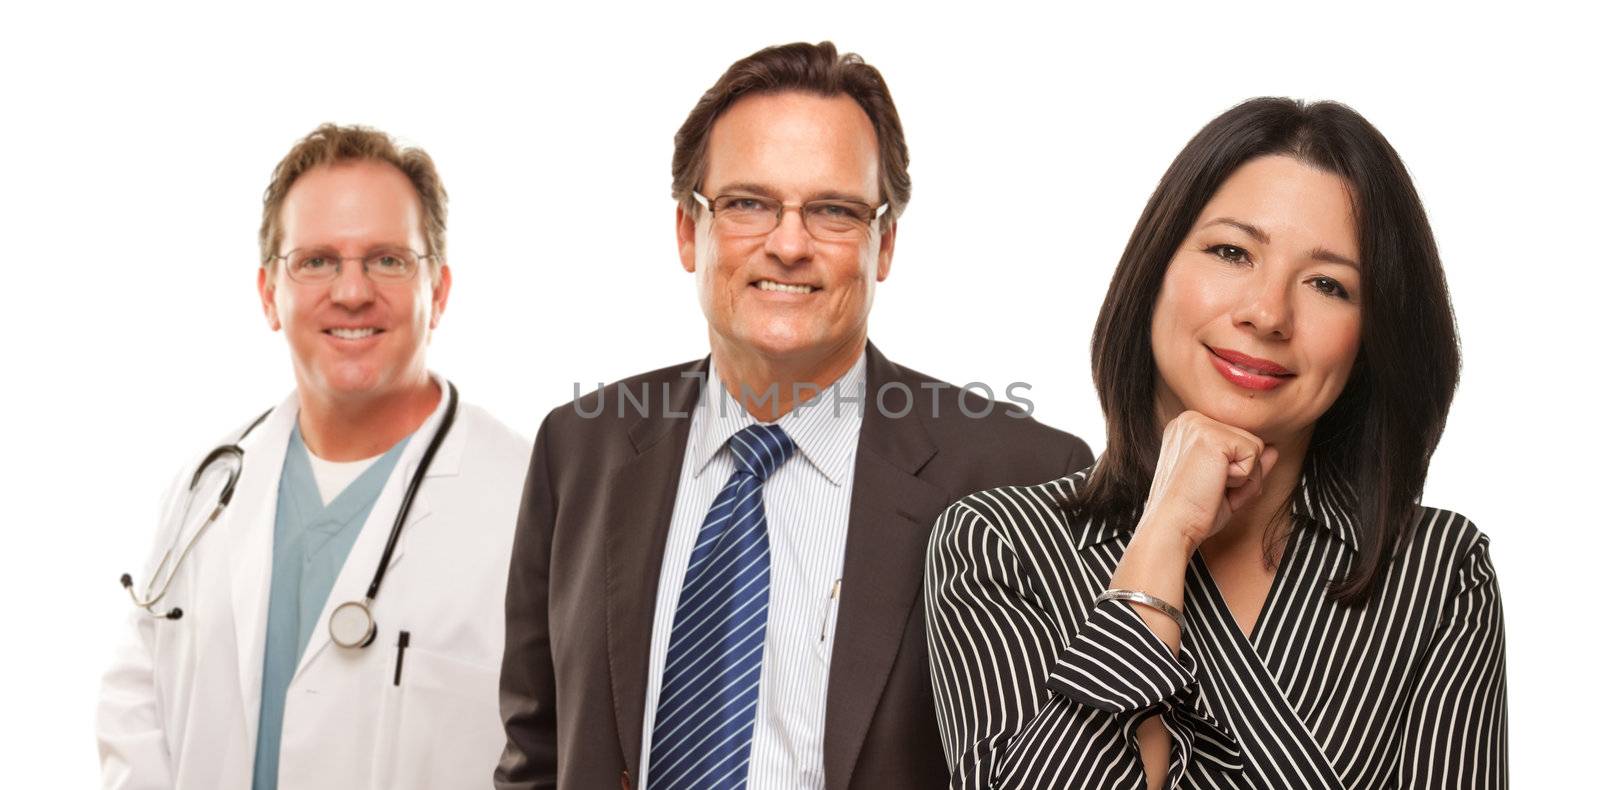 Hispanic Woman with Husband and Male Doctor by Feverpitched